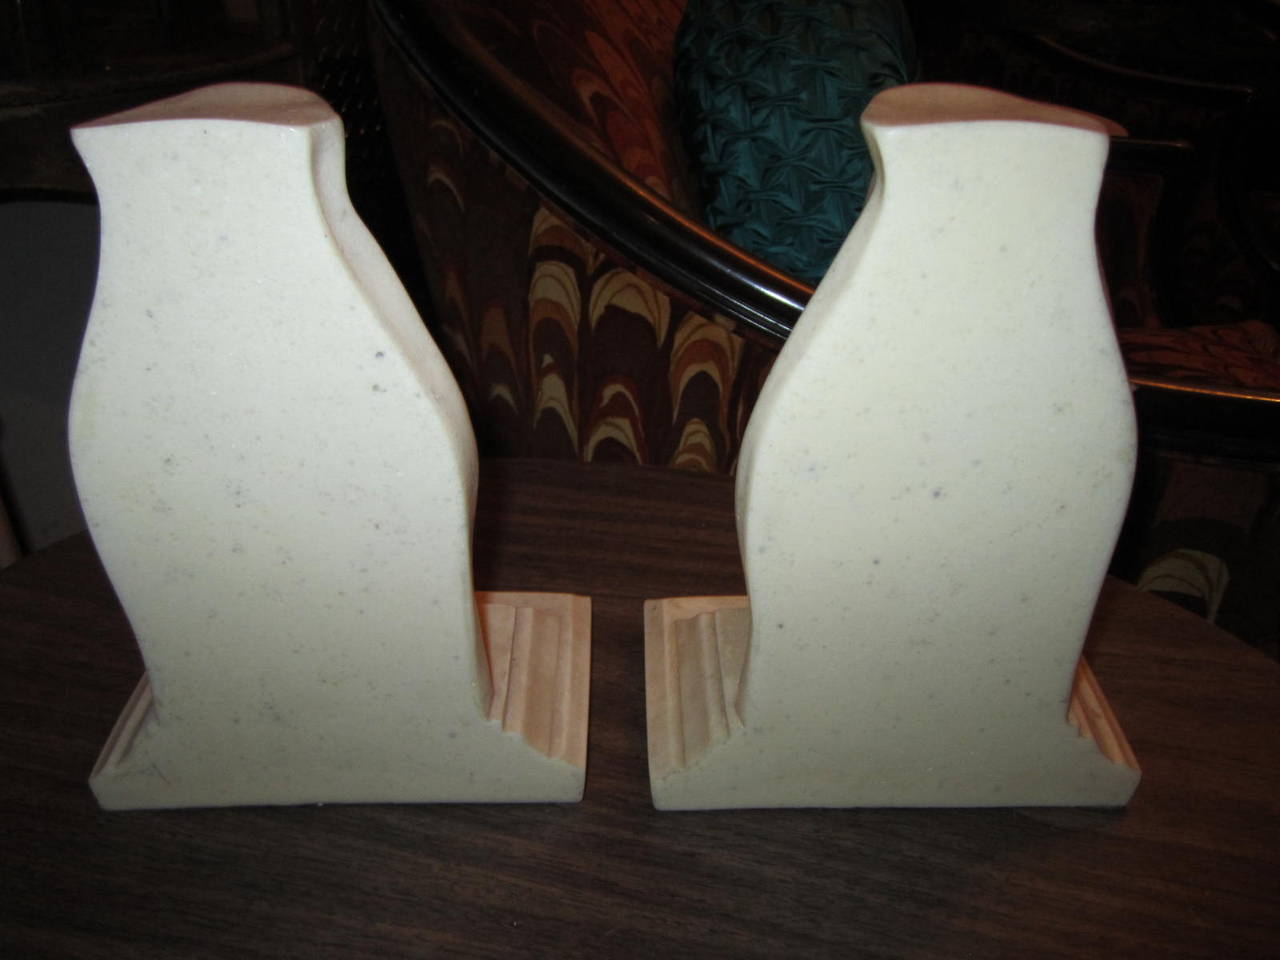 Unusual Pair of Italian Mid-Century Modern Oversized Nose Bookends In Excellent Condition For Sale In Pemberton, NJ